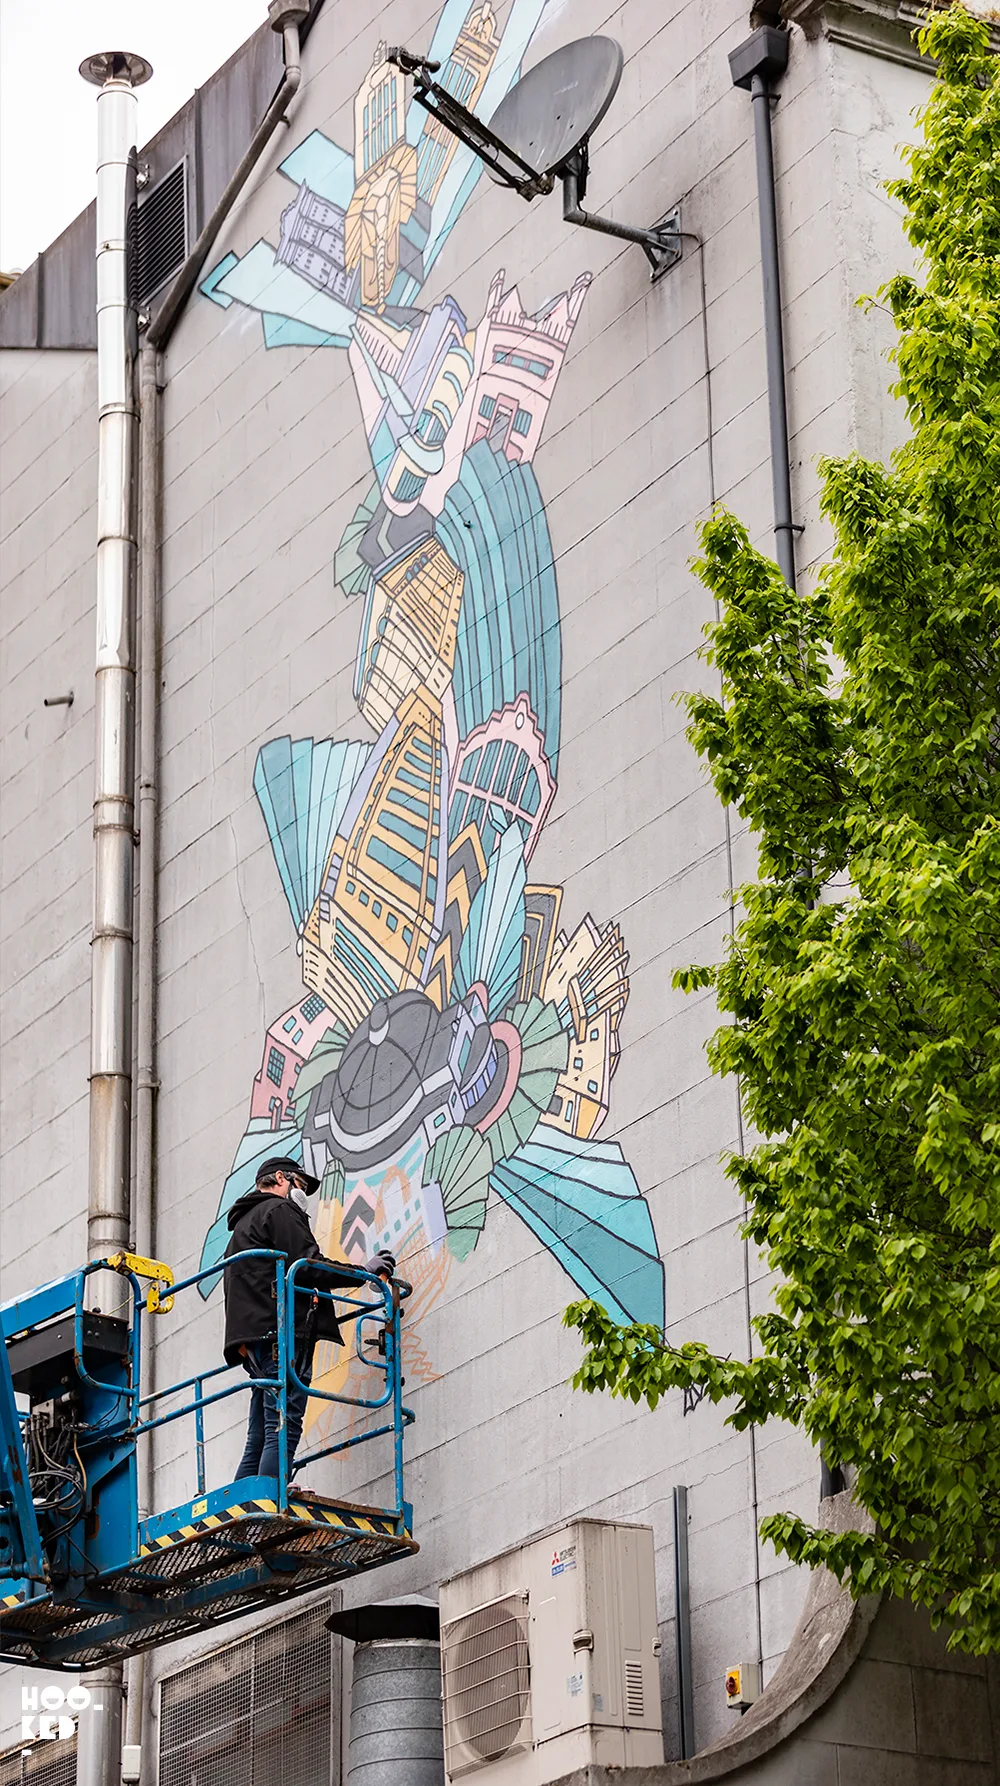 Artist Andy Council at work on a mural in Belfast, Ireland